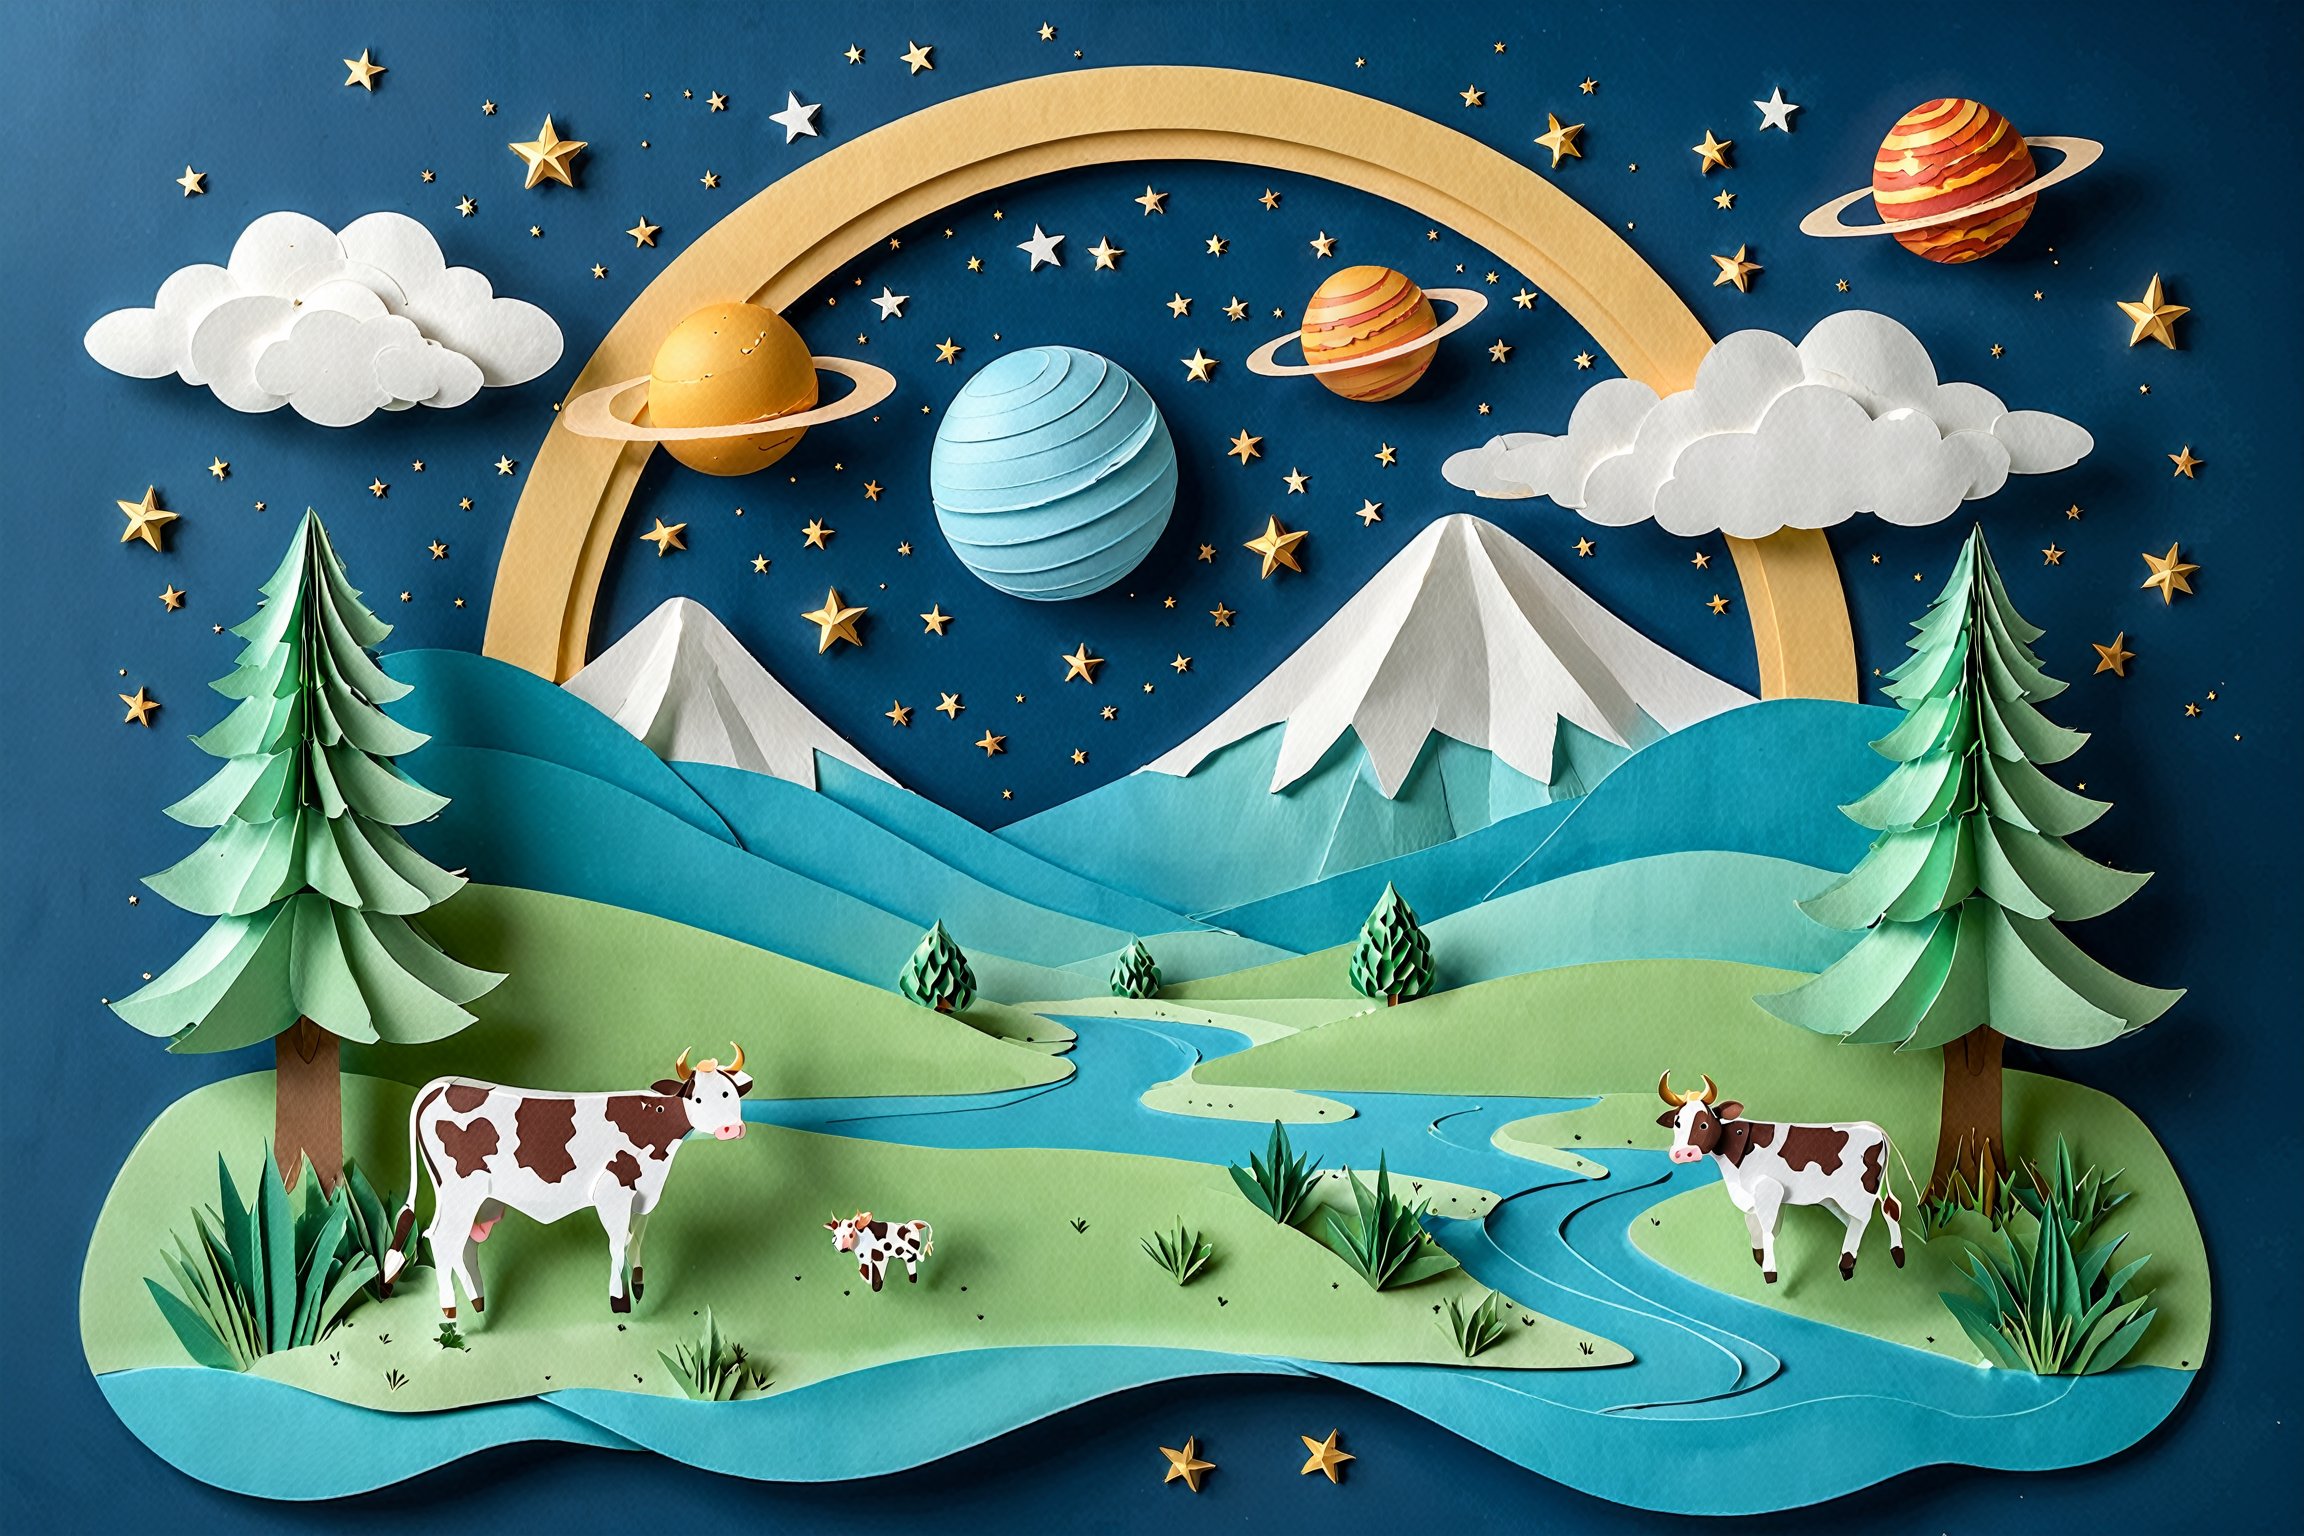 A picturesque landscape, possibly a papercraft representation. Dominating the scene is a large, crescent moon set against a starry night sky. Below, there are two snow-capped mountains, with a winding river flowing through a lush green valley. The valley is dotted with trees, bushes, and a solitary cow grazing by the riverbank. Above, there are fluffy white clouds and a few planets, adding to the surreal nature of the scene. The entire composition is set against a deep blue background, creating a serene and dreamy atmosphere.